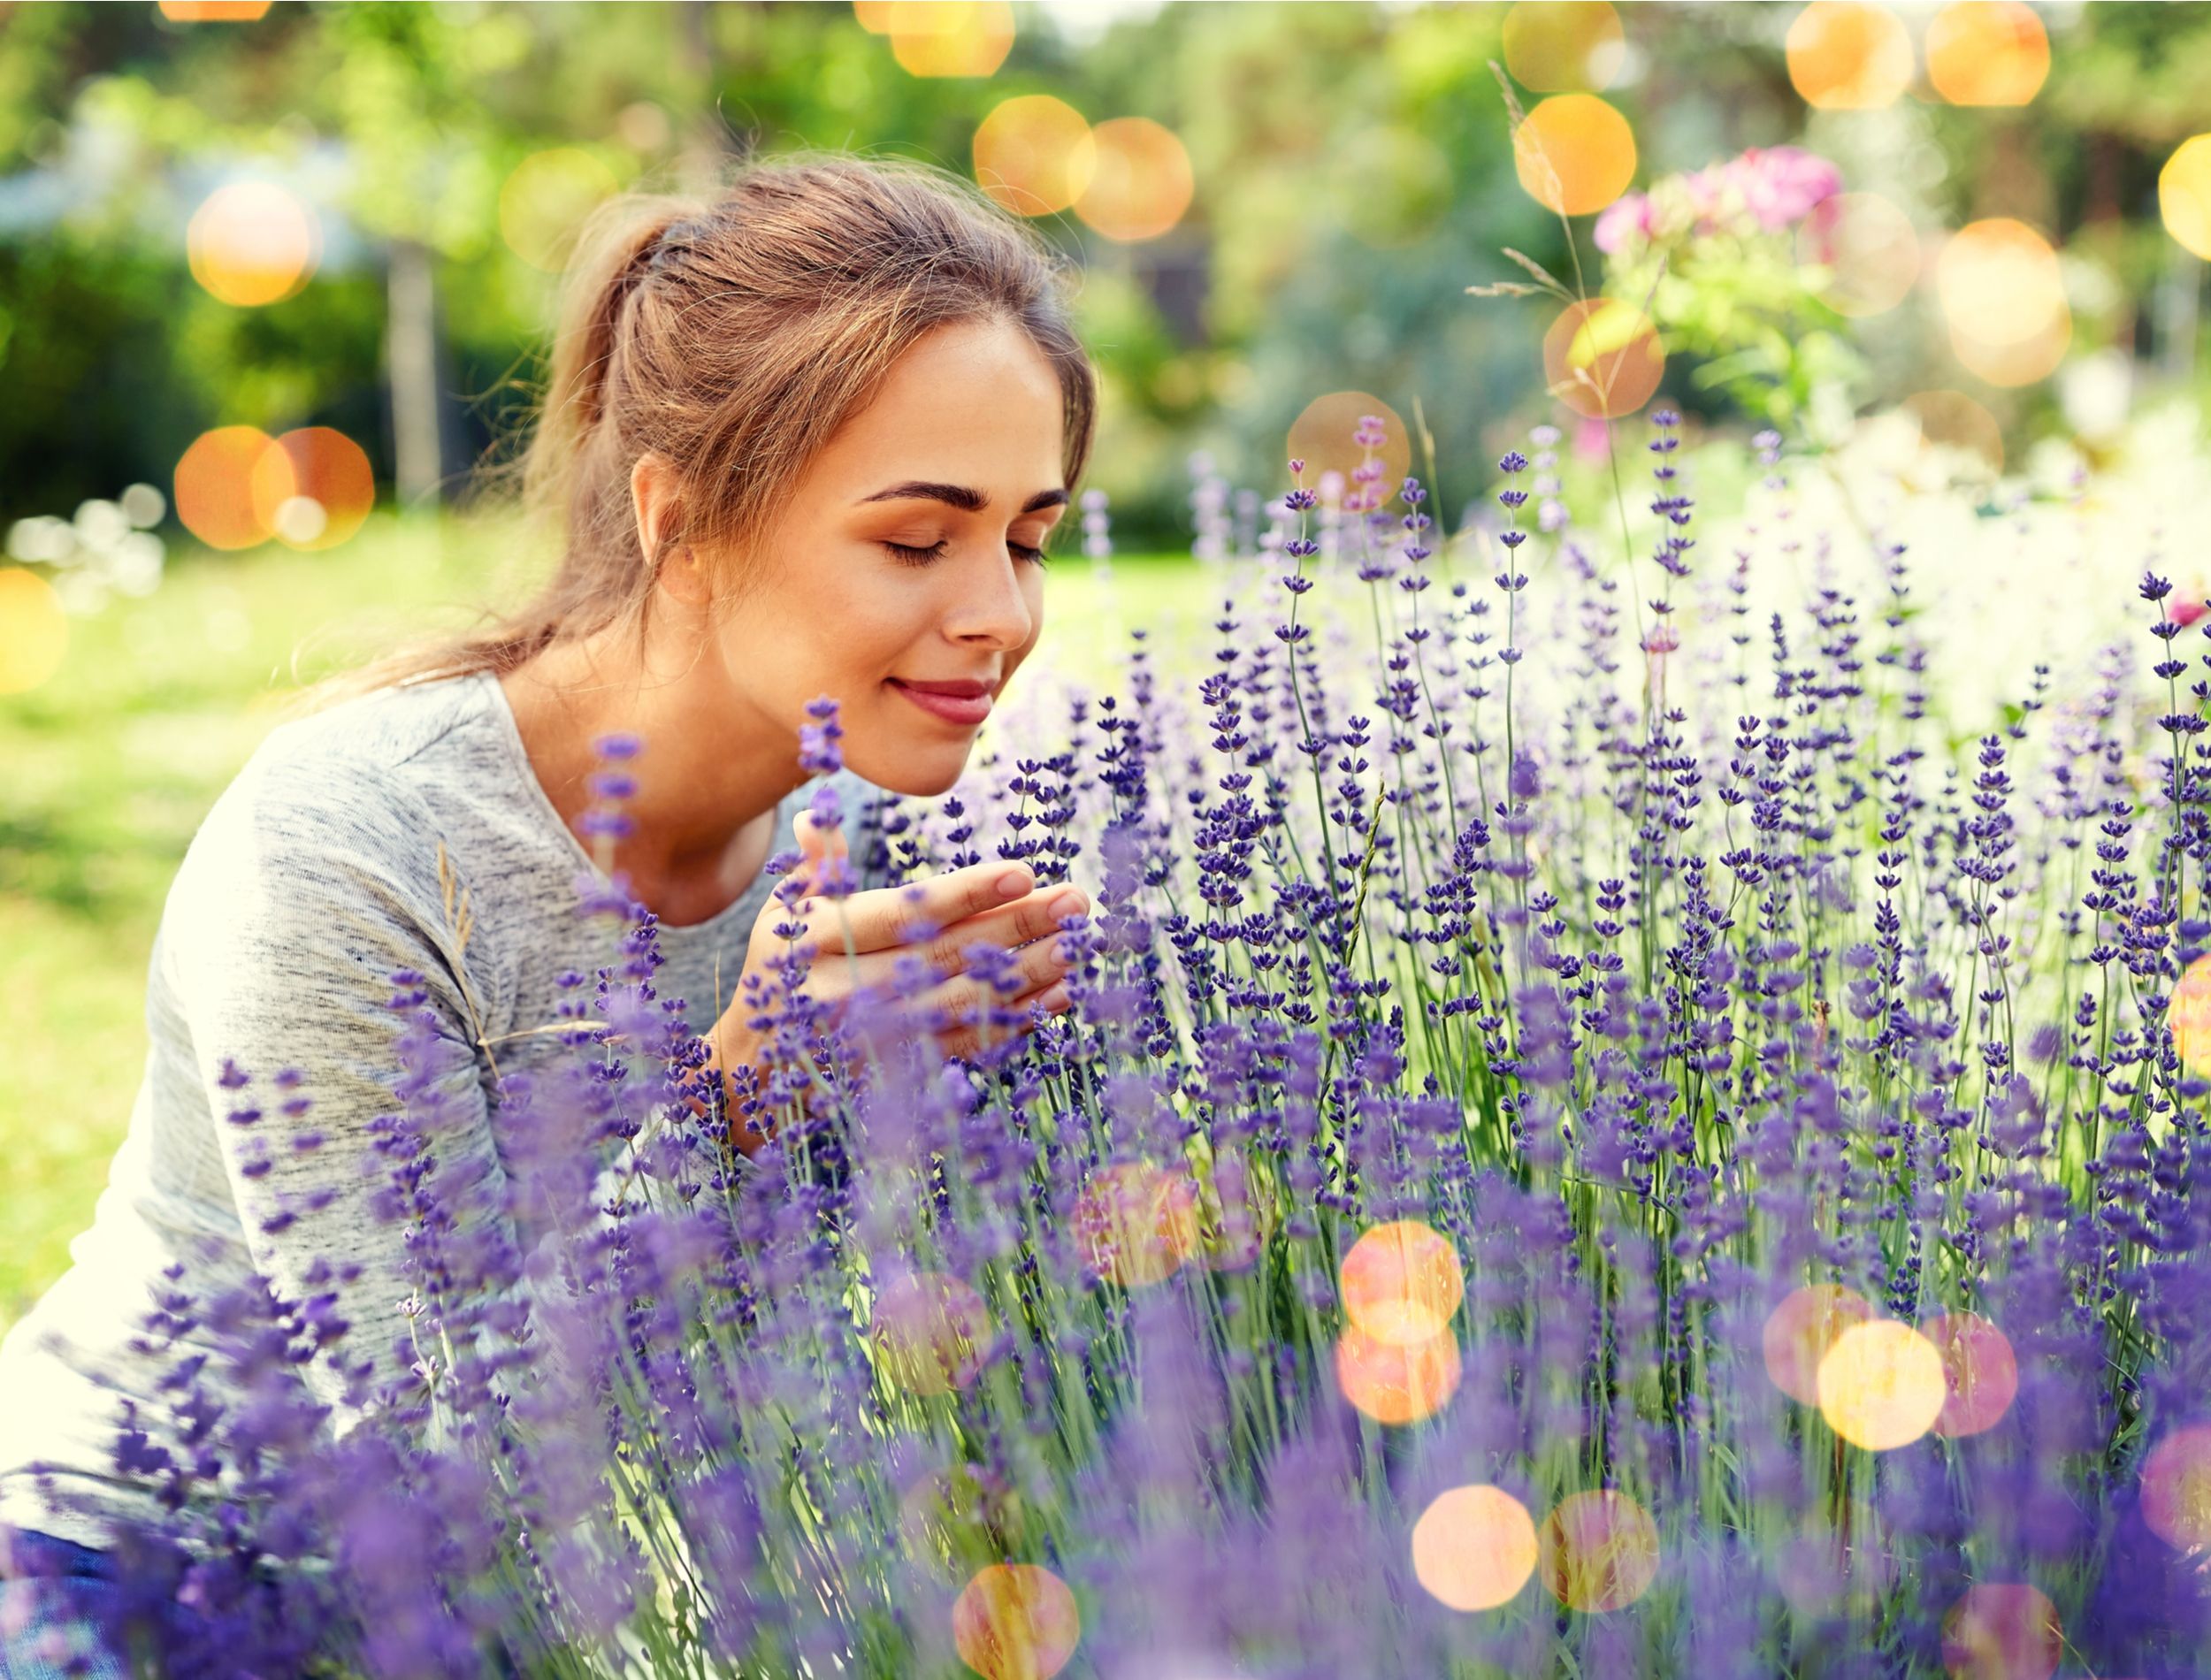 happy young woman smelling lavender flowers at summer garden over festive lights background